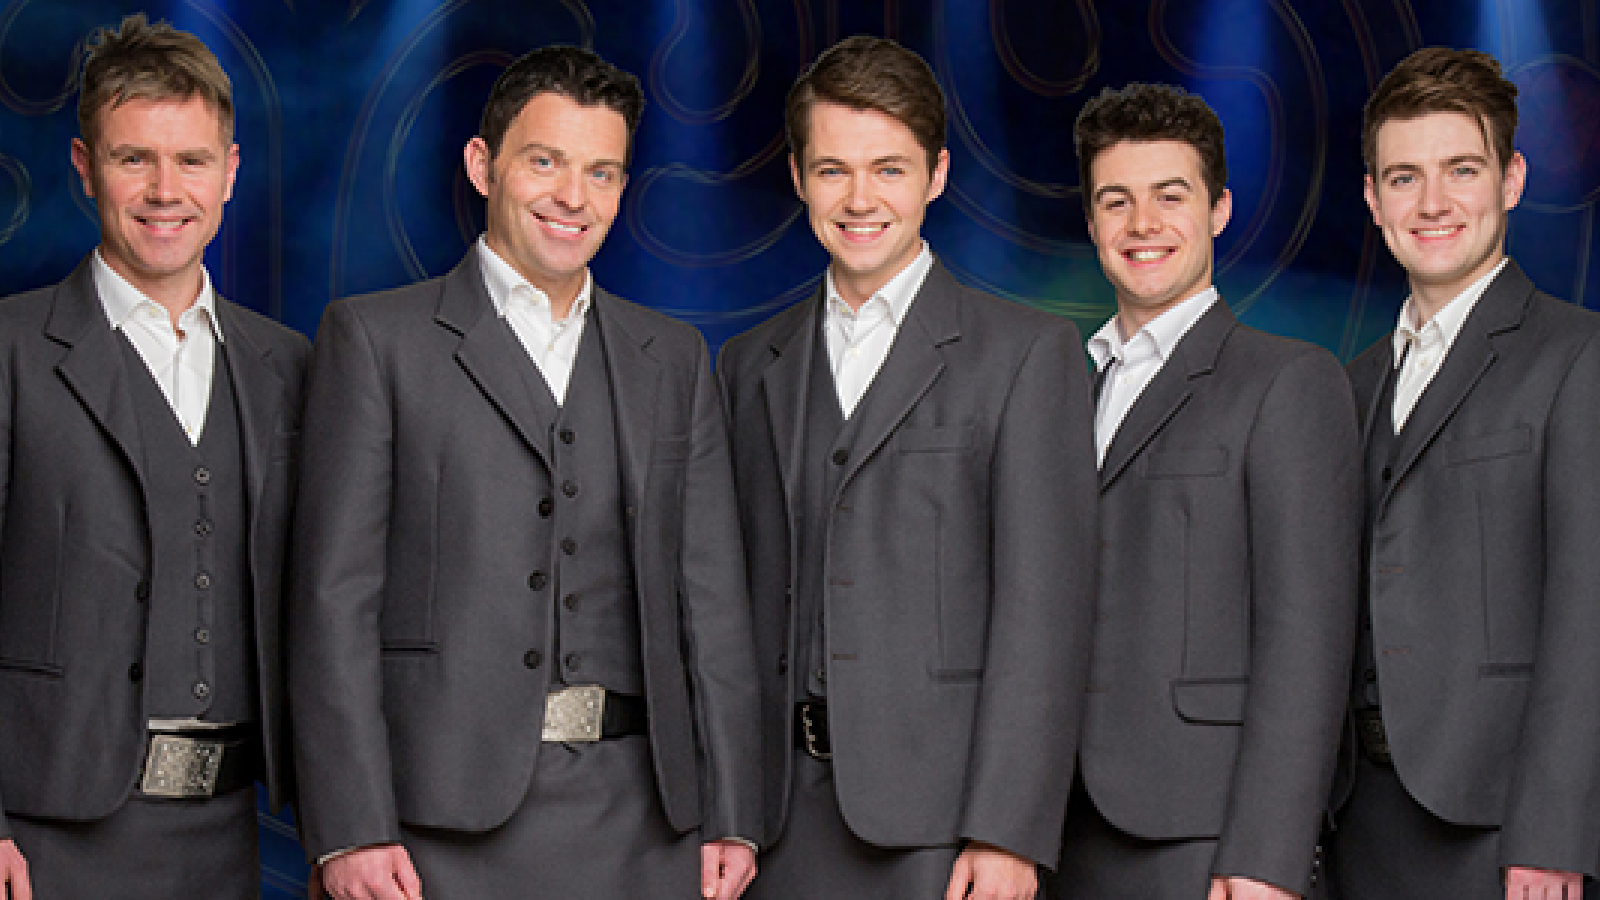 Celtic Thunder in Concert at the Chicago Theatre (sold out) WTTW Chicago